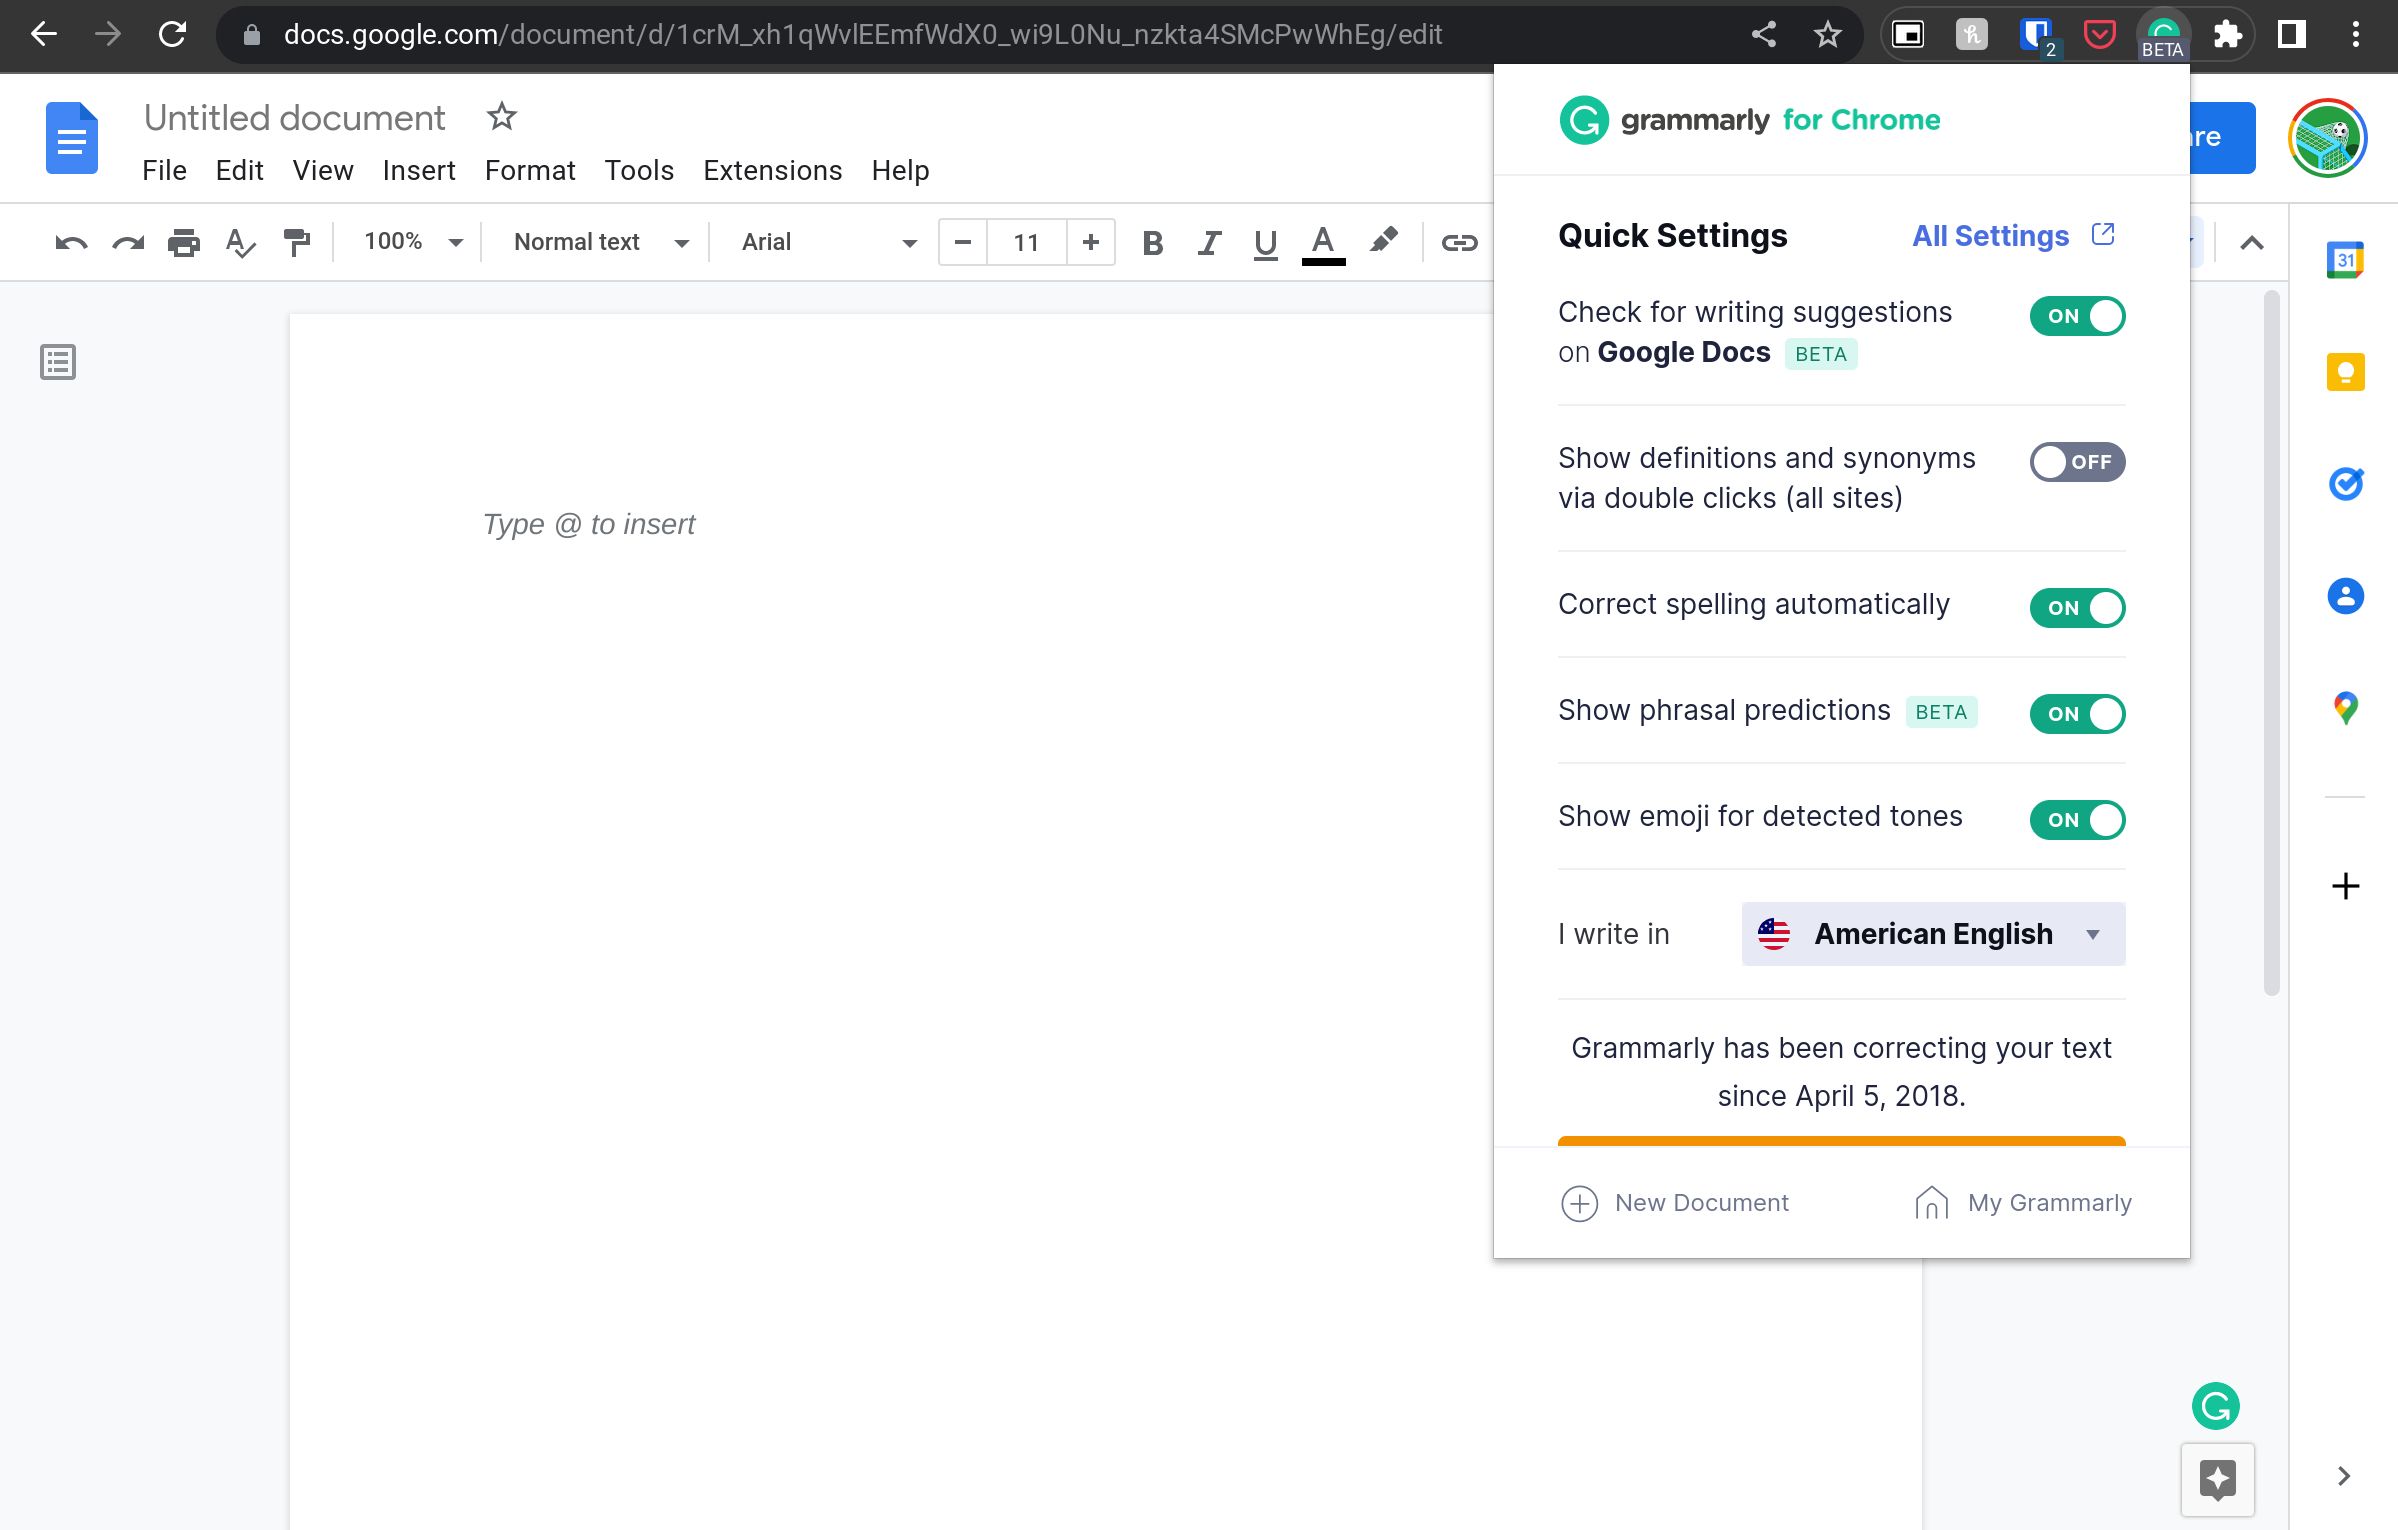 The Grammarly Chrome extension menu open when in a Google Doc